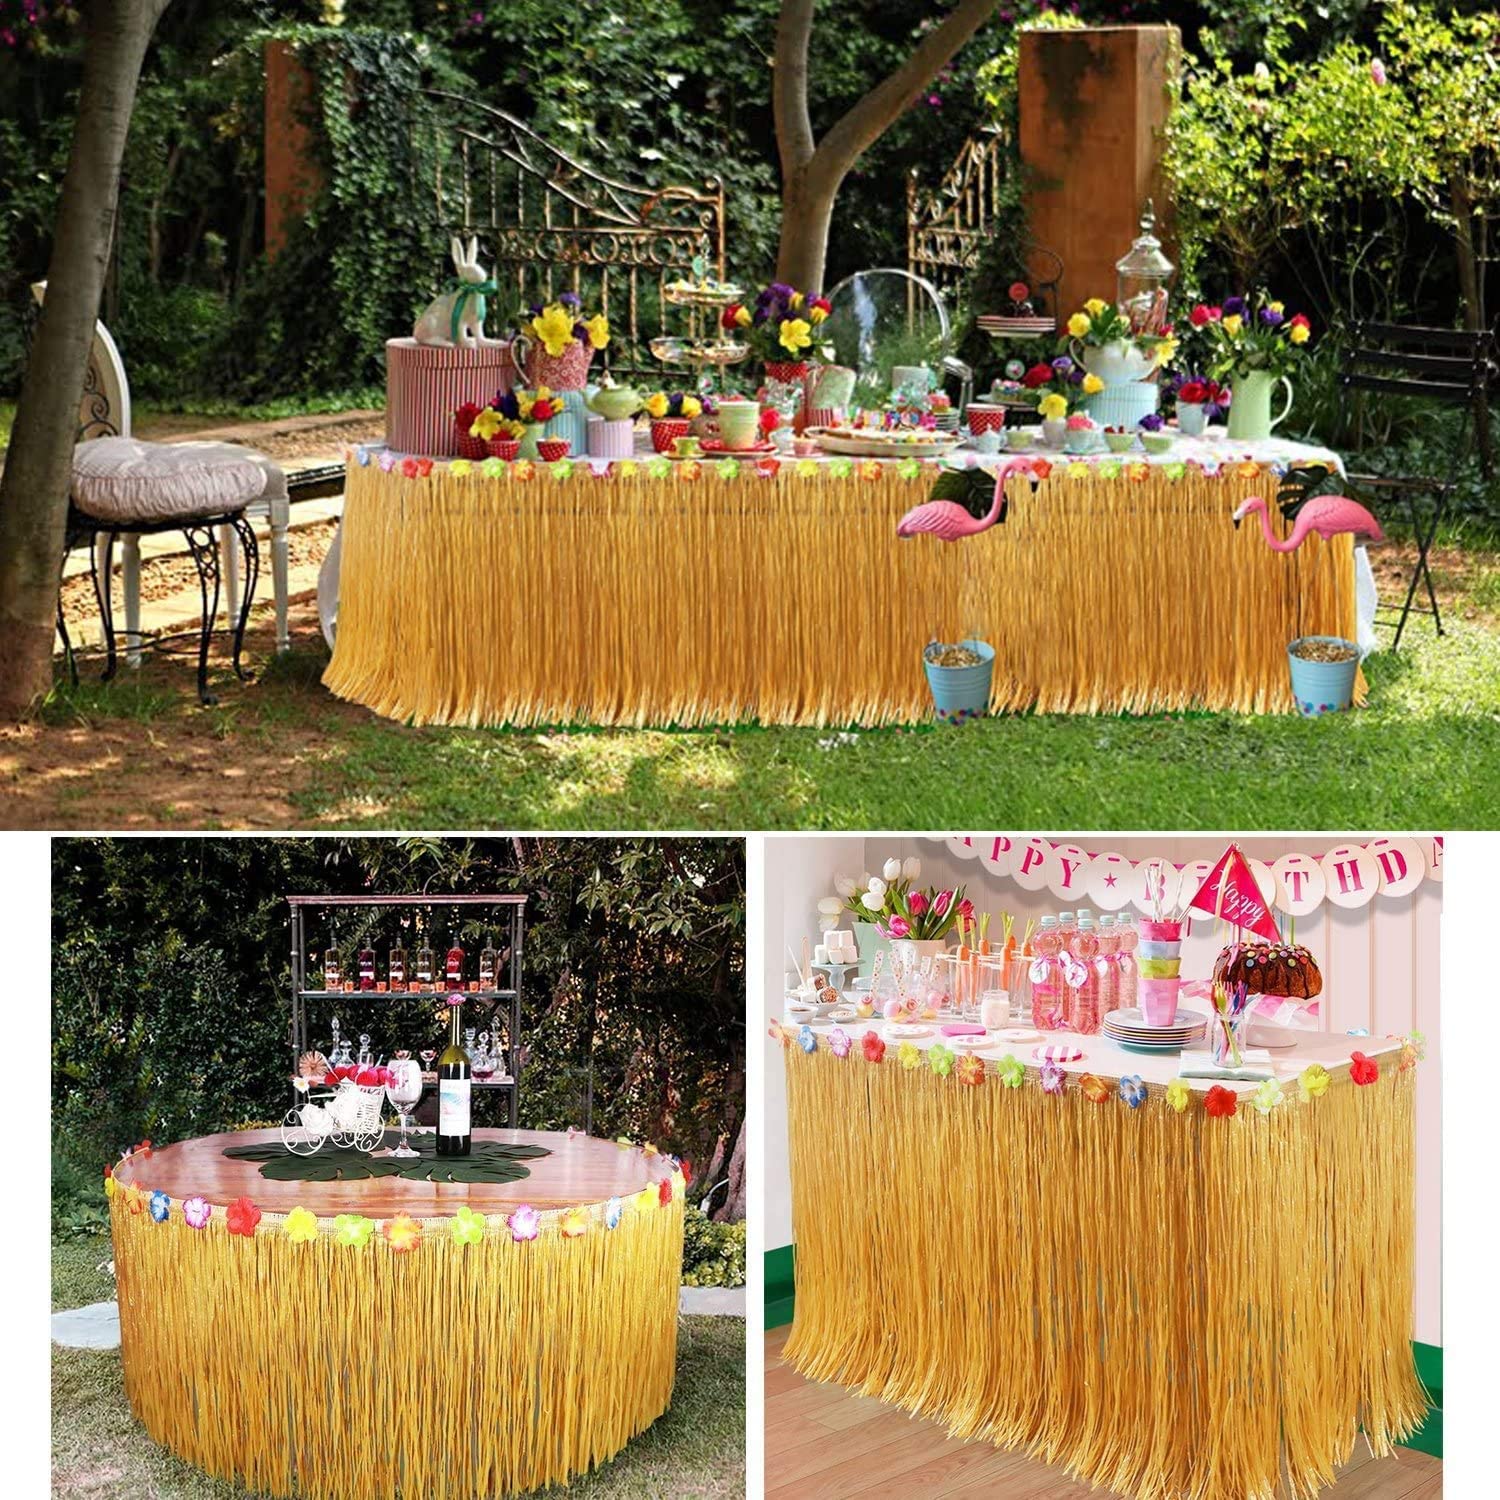 2-Sizes-Straw-Color-Luau-Grass-Table-Skirt-Straw-Hawaiian-Summer-Theme-Party-Supplies-for-Tropical